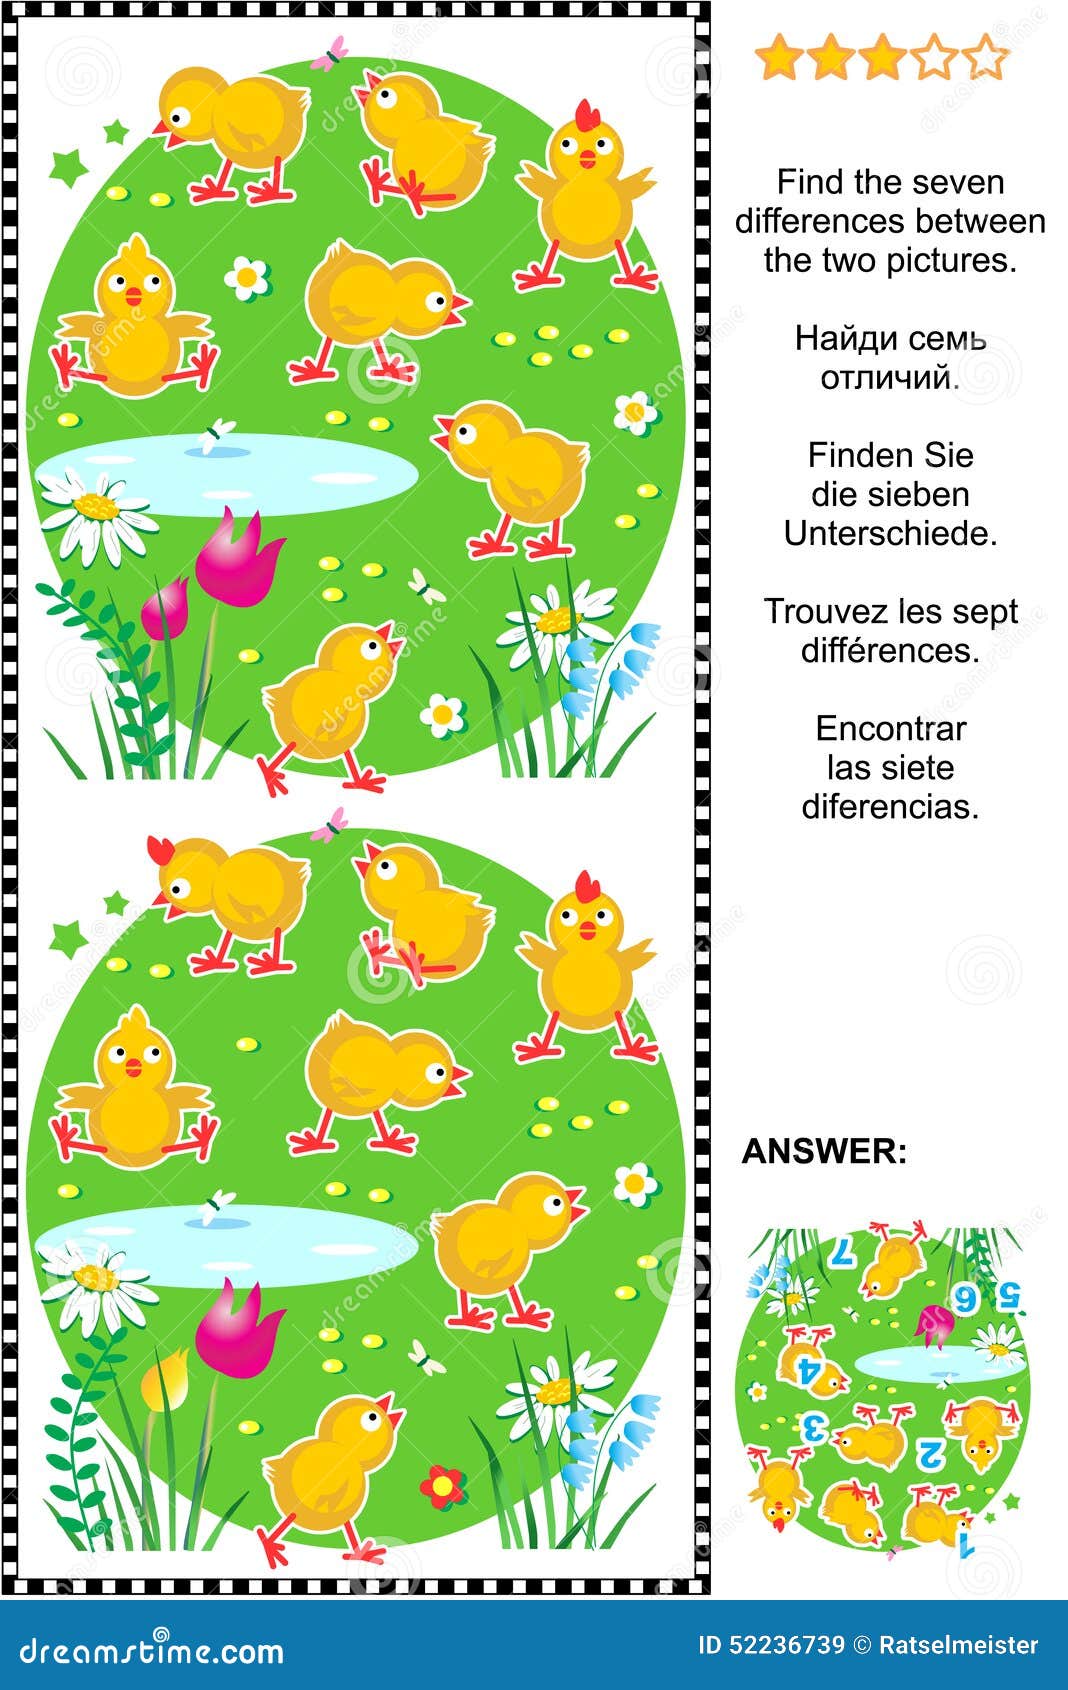 Find The Differences Visual Puzzle - Chicks Stock Vector - Image: 52236739